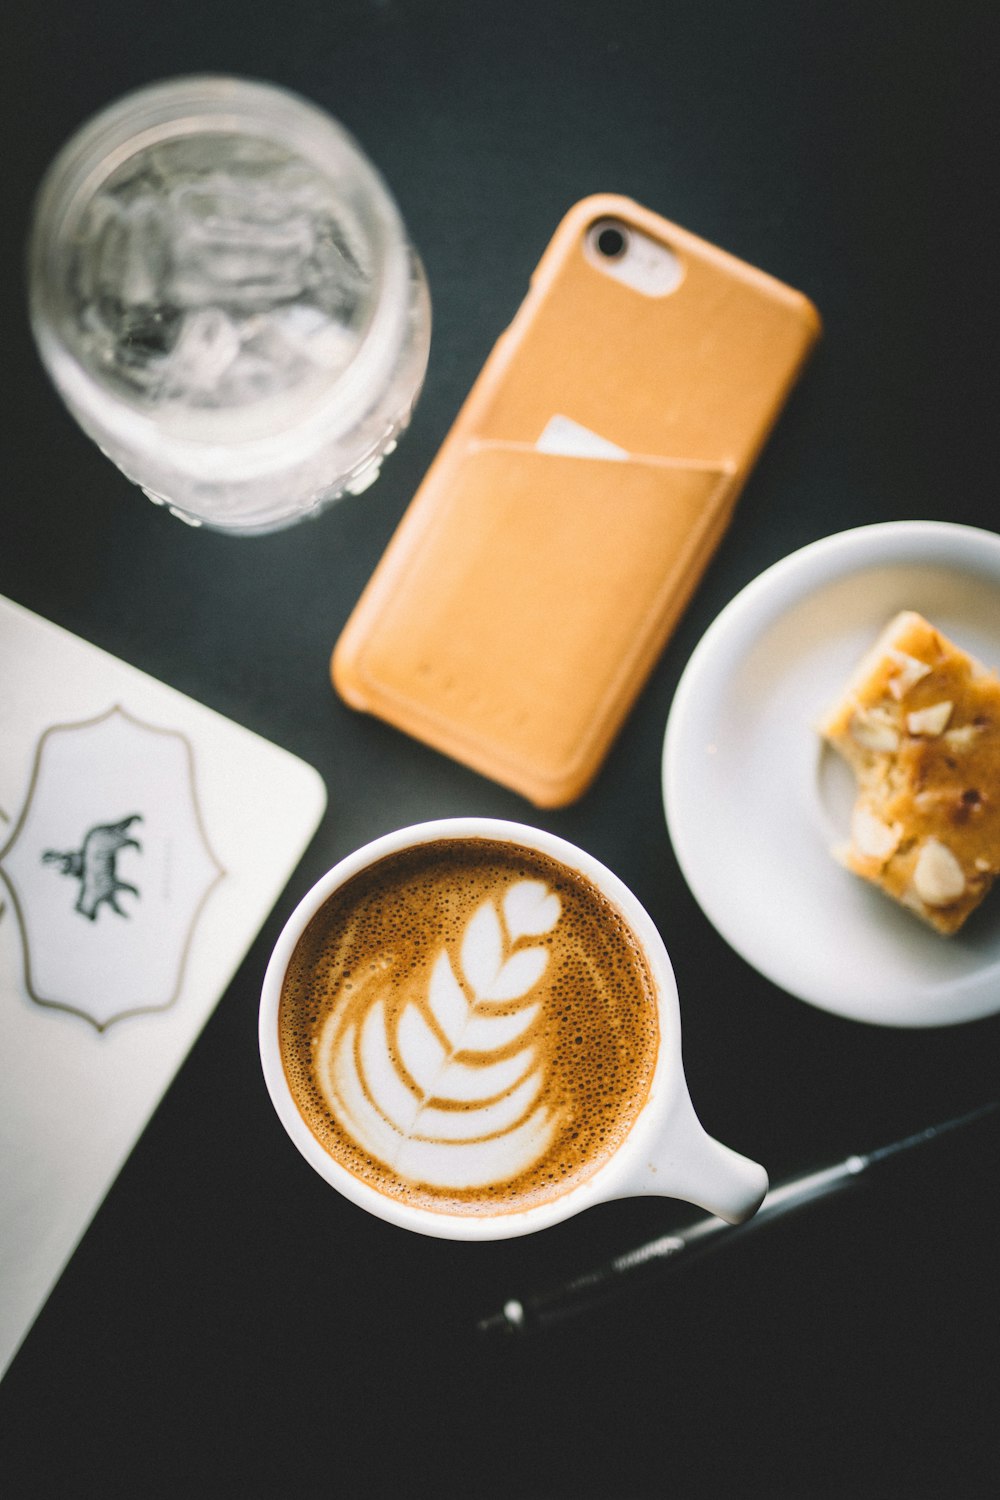 selective focus photo of cup of cappuccino beside smartphone, saucer, and glass